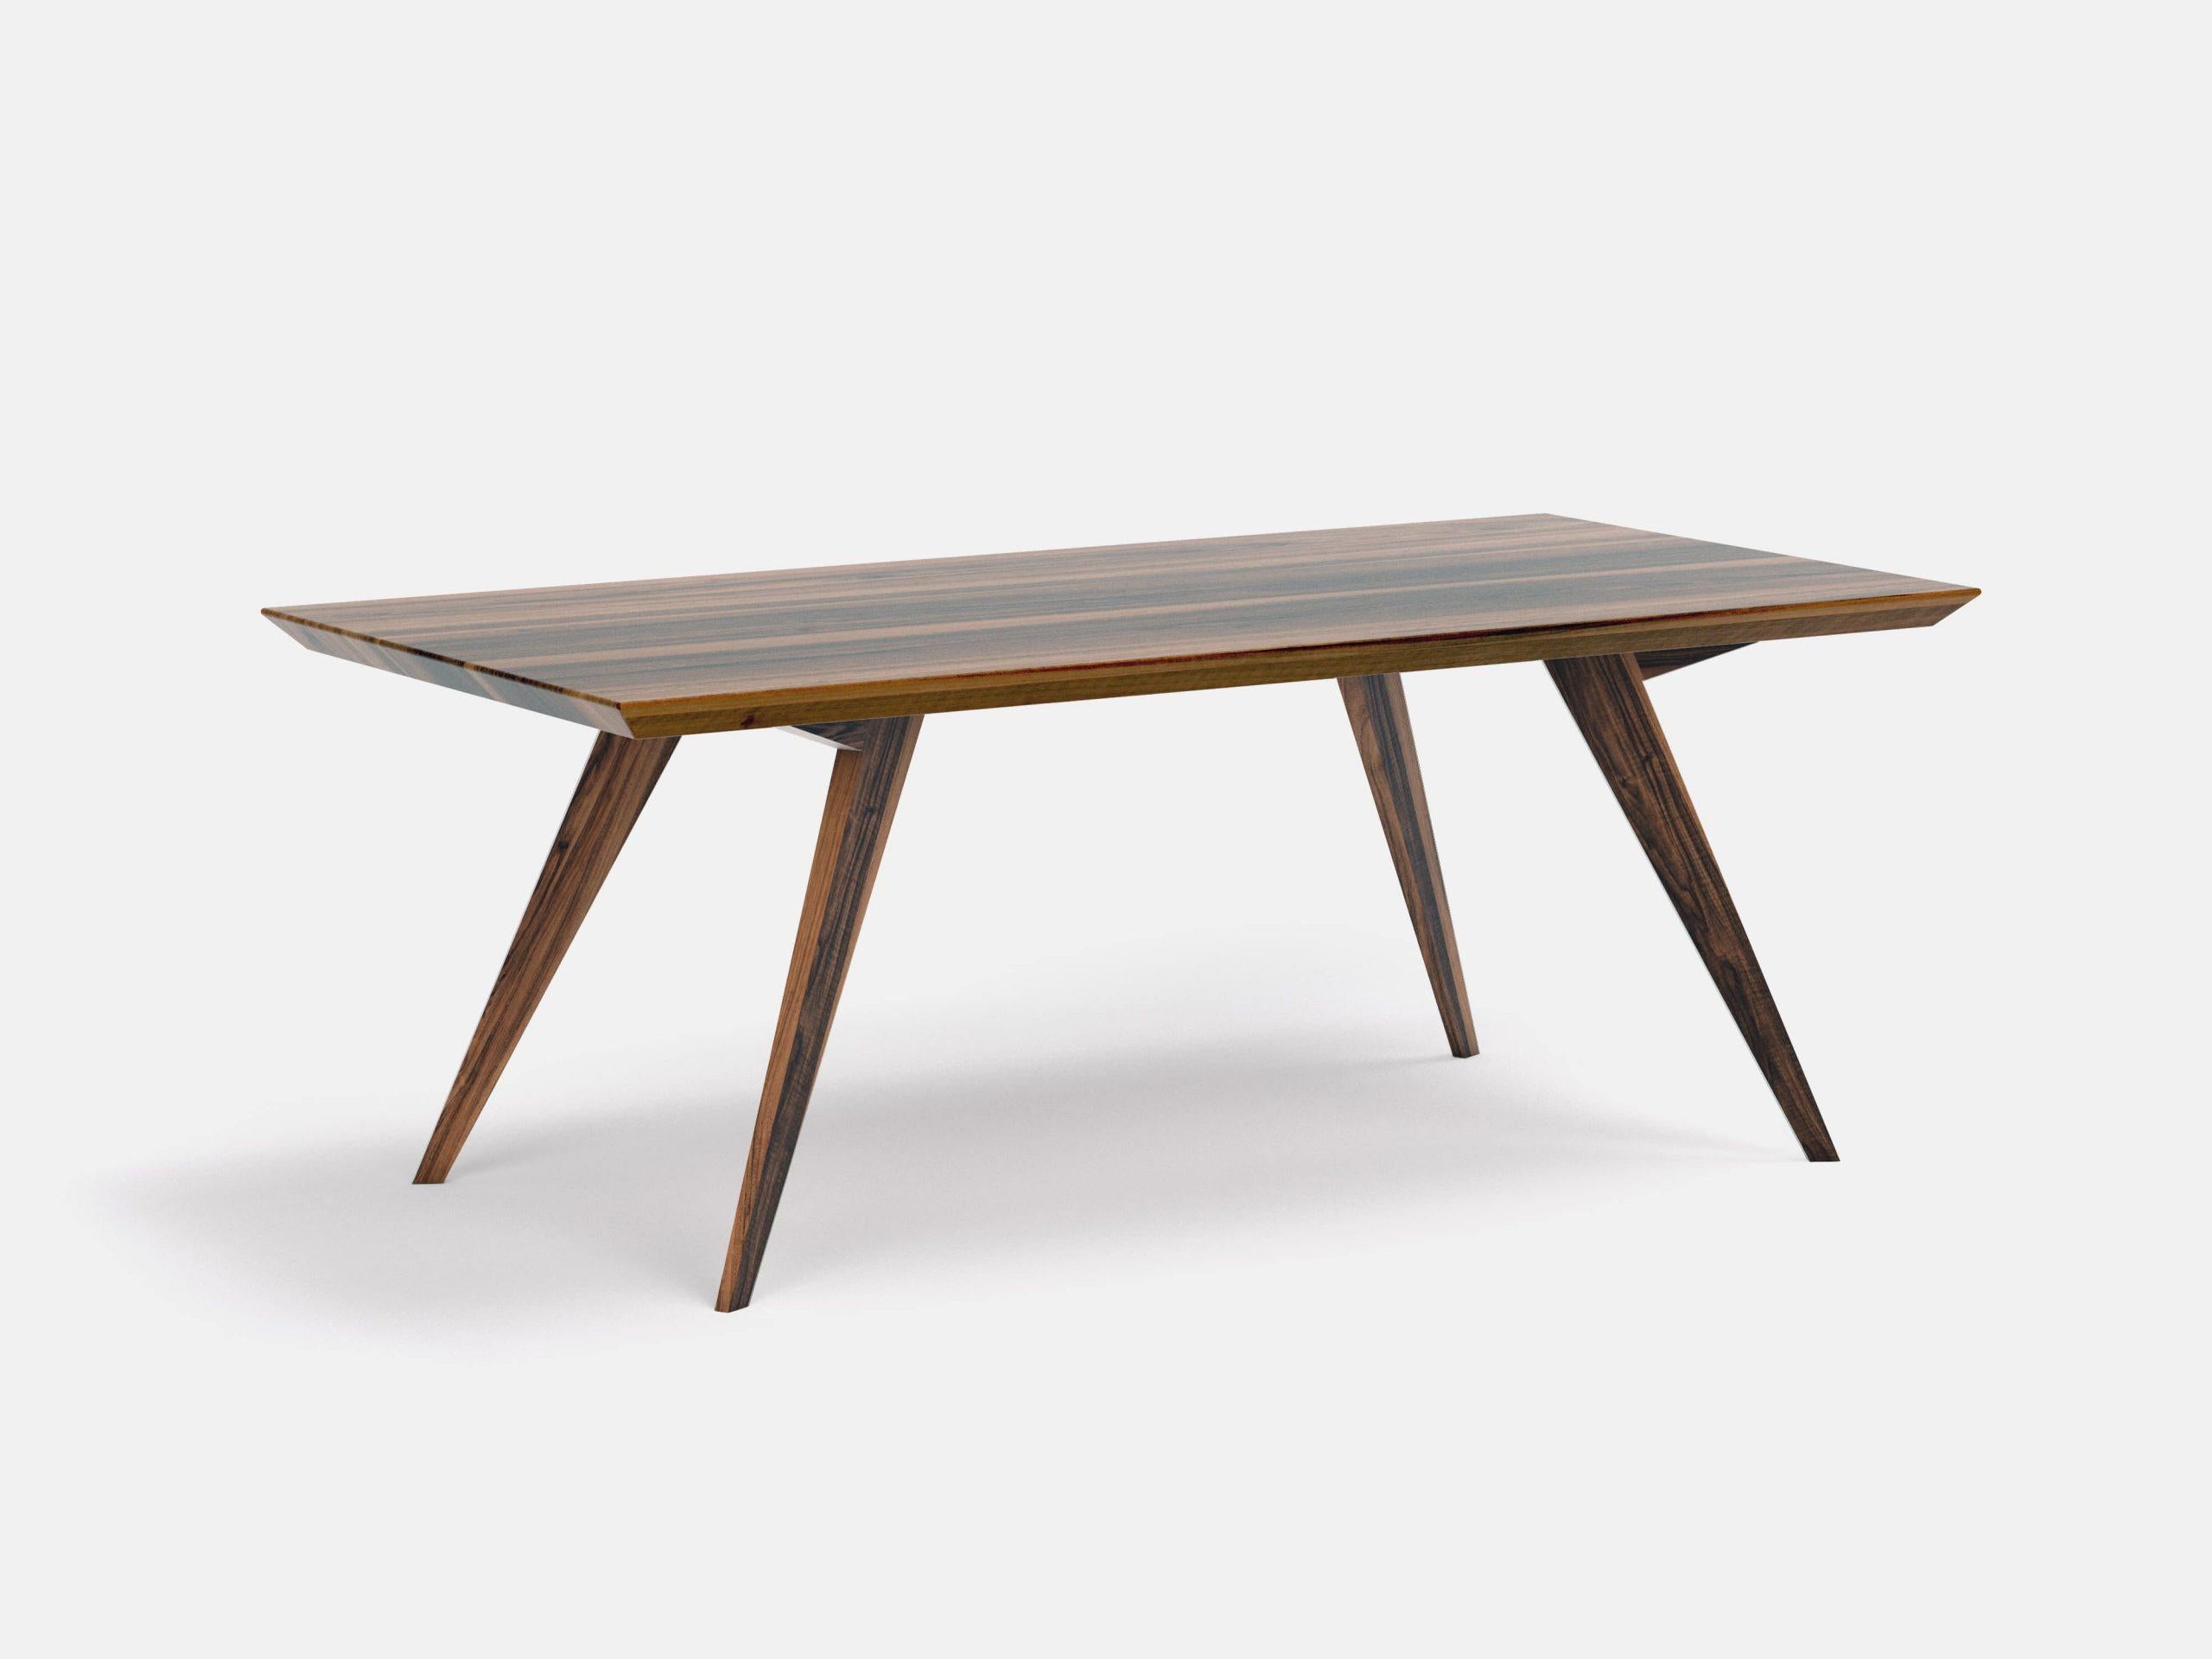 Walnut Minimalist dining table
Dimensions: W 160 x D 100 x H 75 cm
Materials: American walnut 100% solid wood

Roly-Poly table is the proof that through design we can create lightness and simplicity even when the products are heavy.

Our